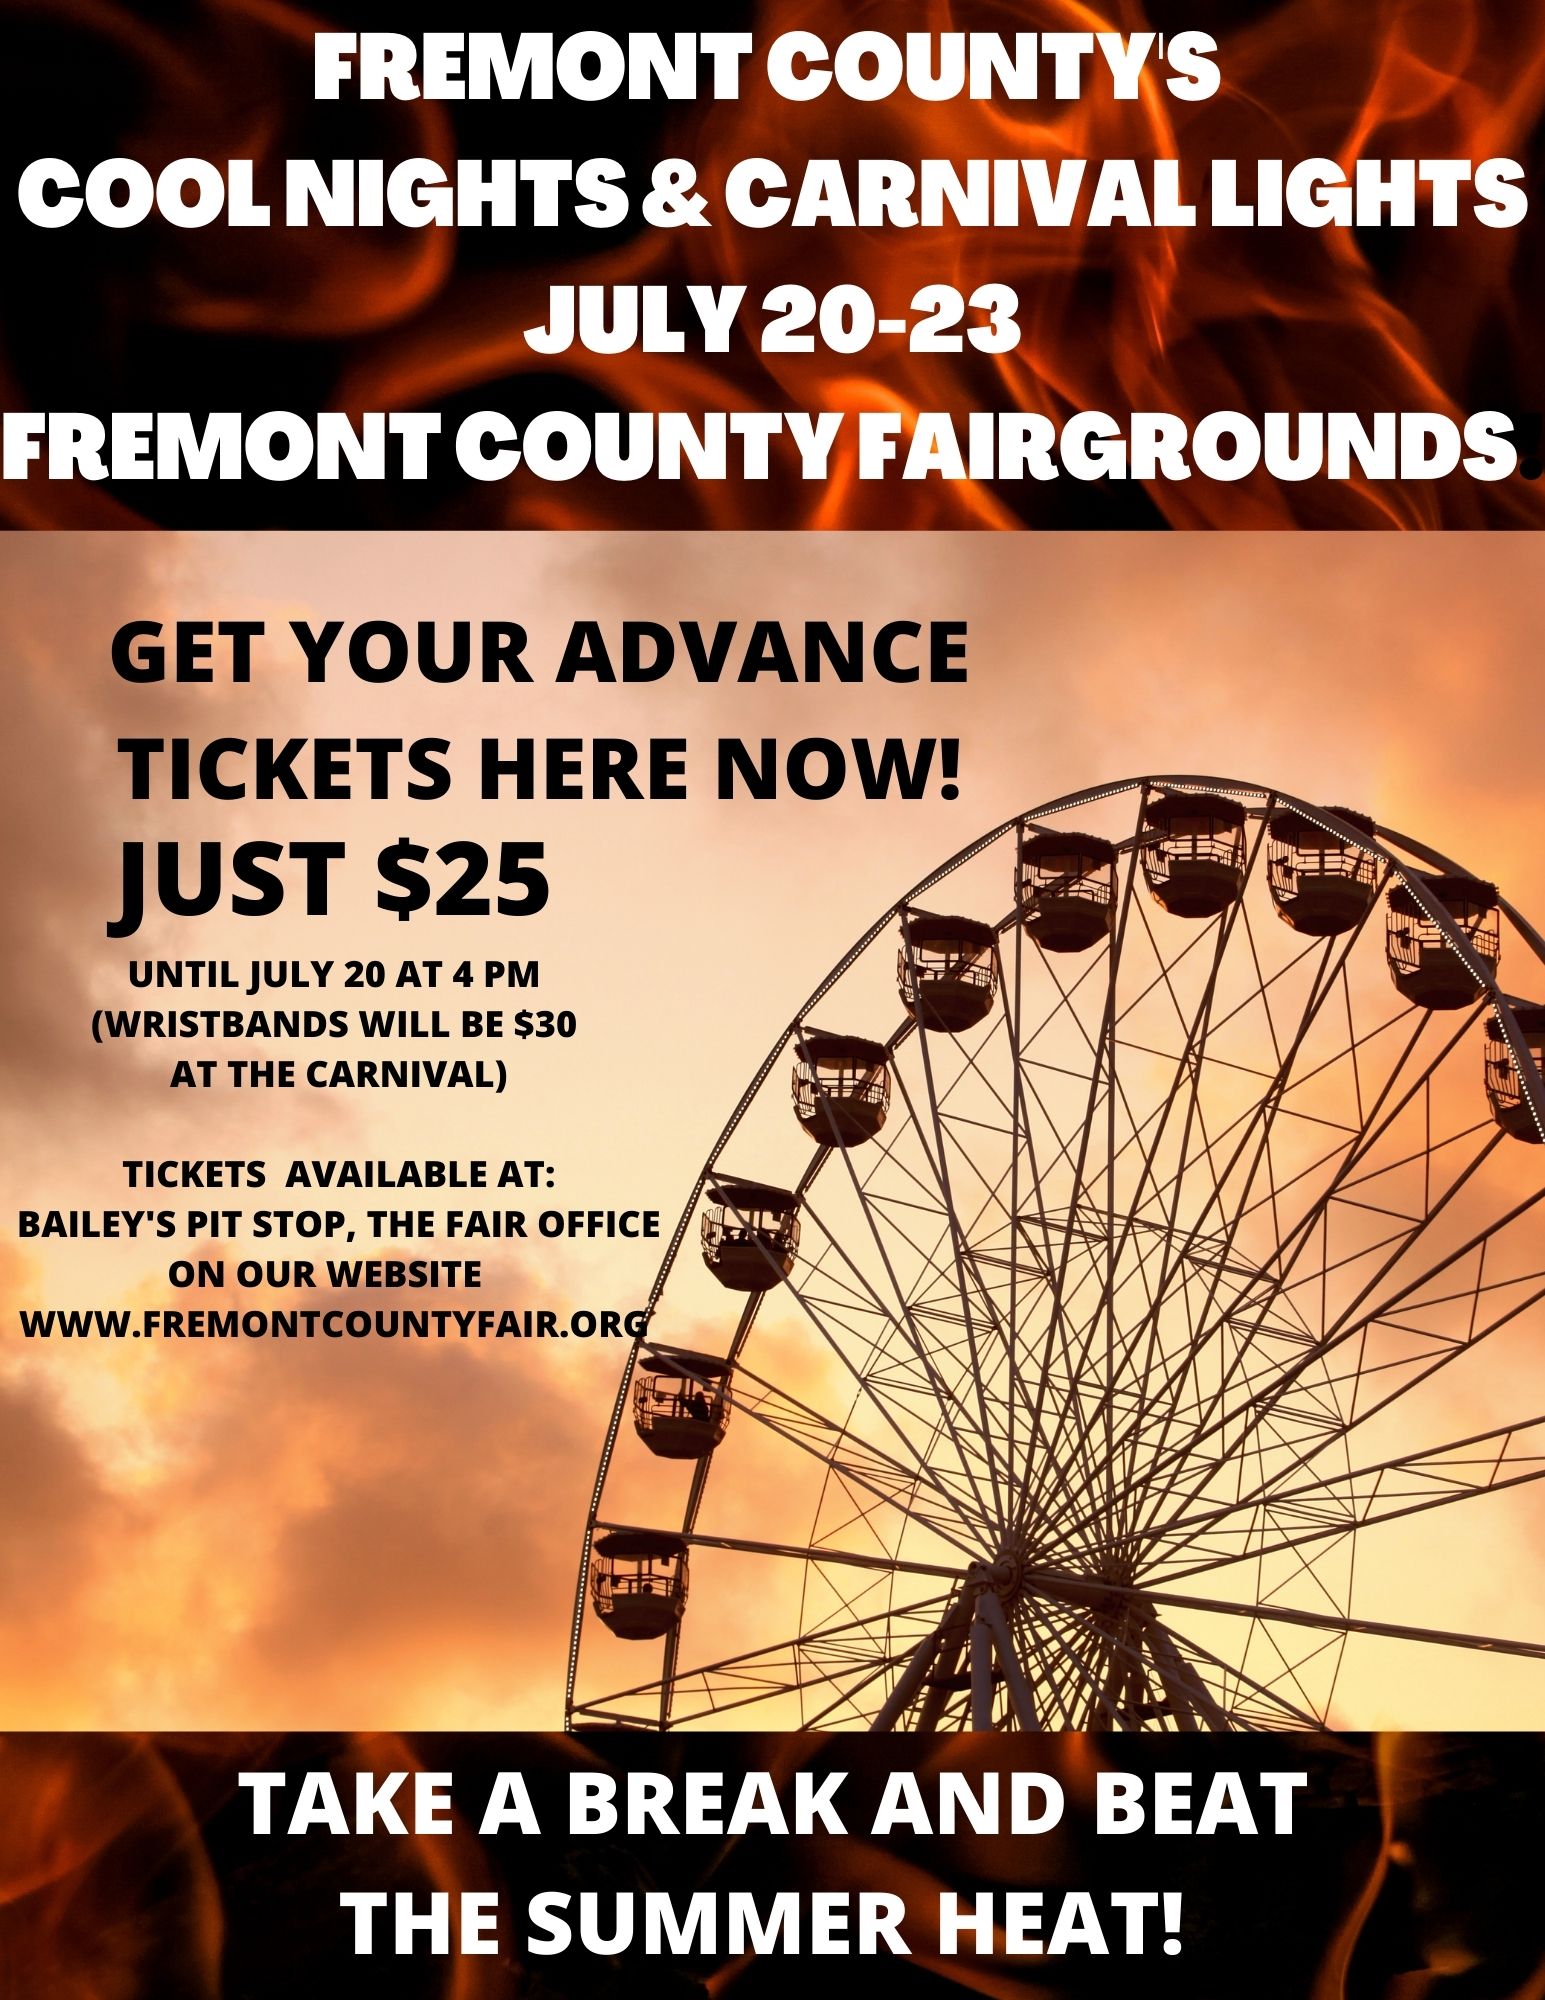 Fremont County Cool Nights & Carnival Lights